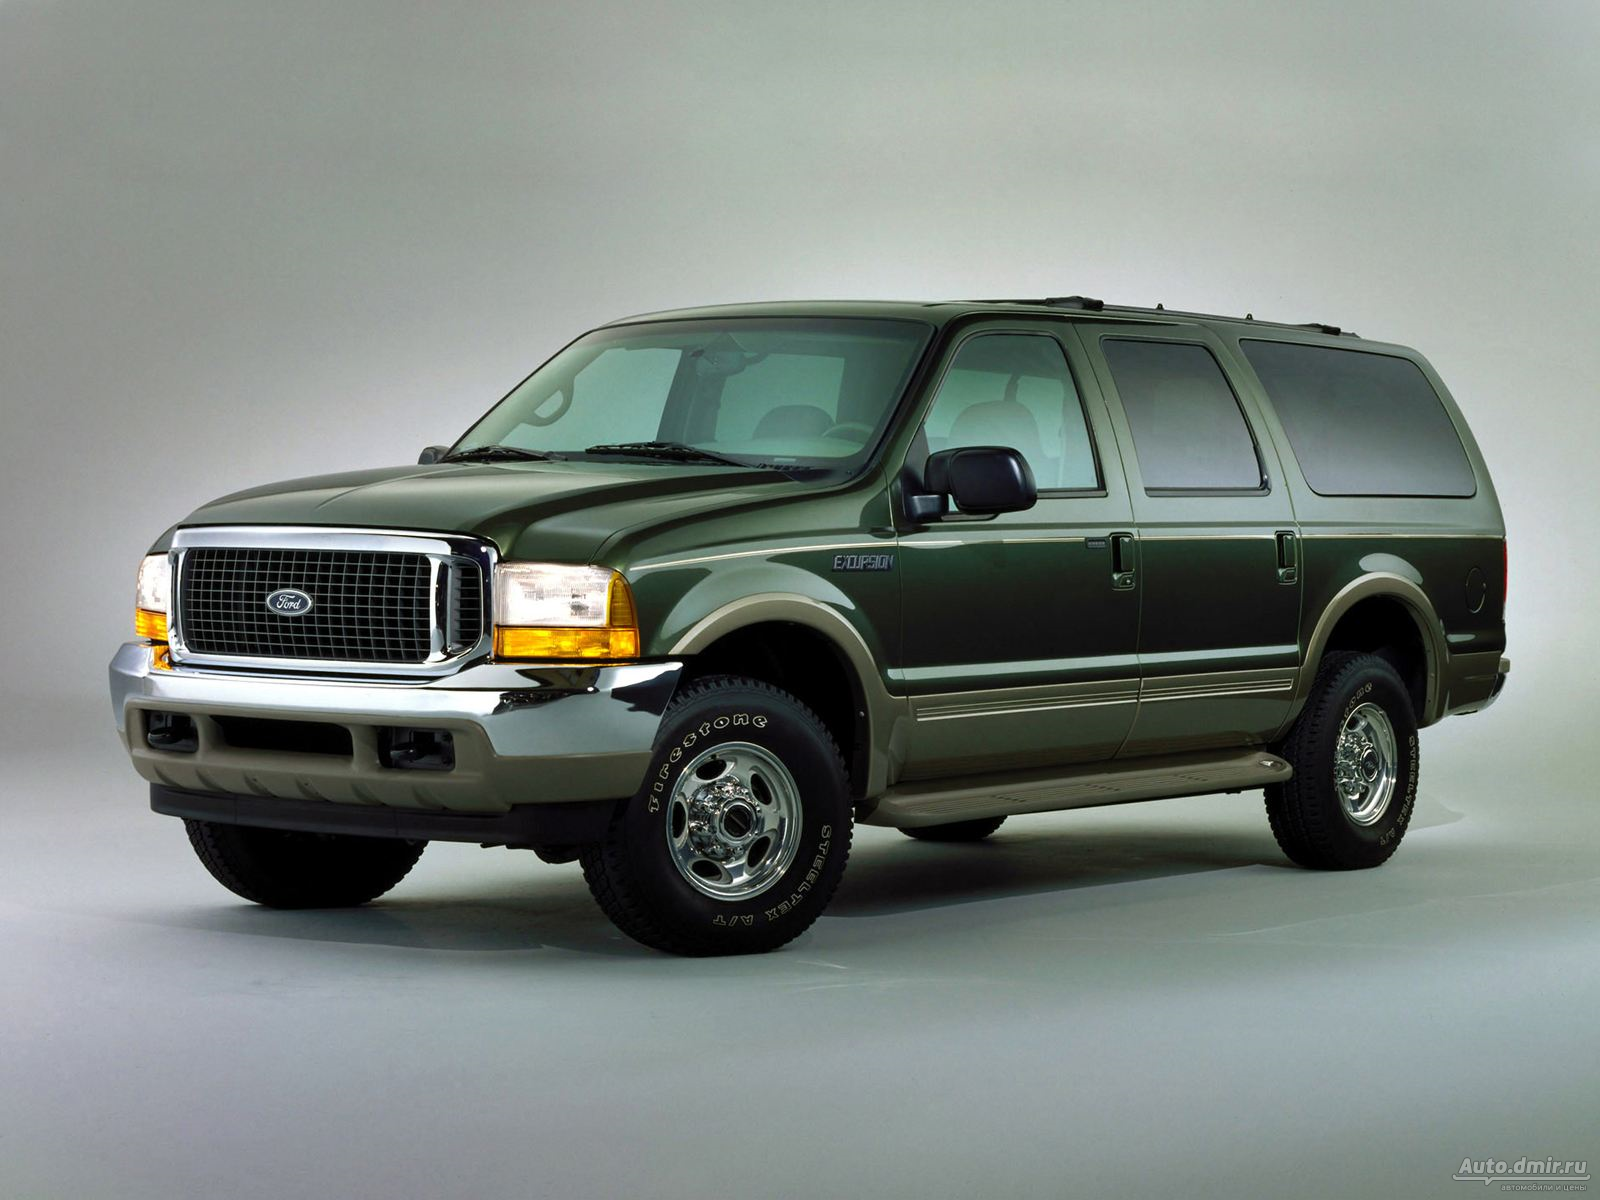 Ford excursion 2012 photo - 7